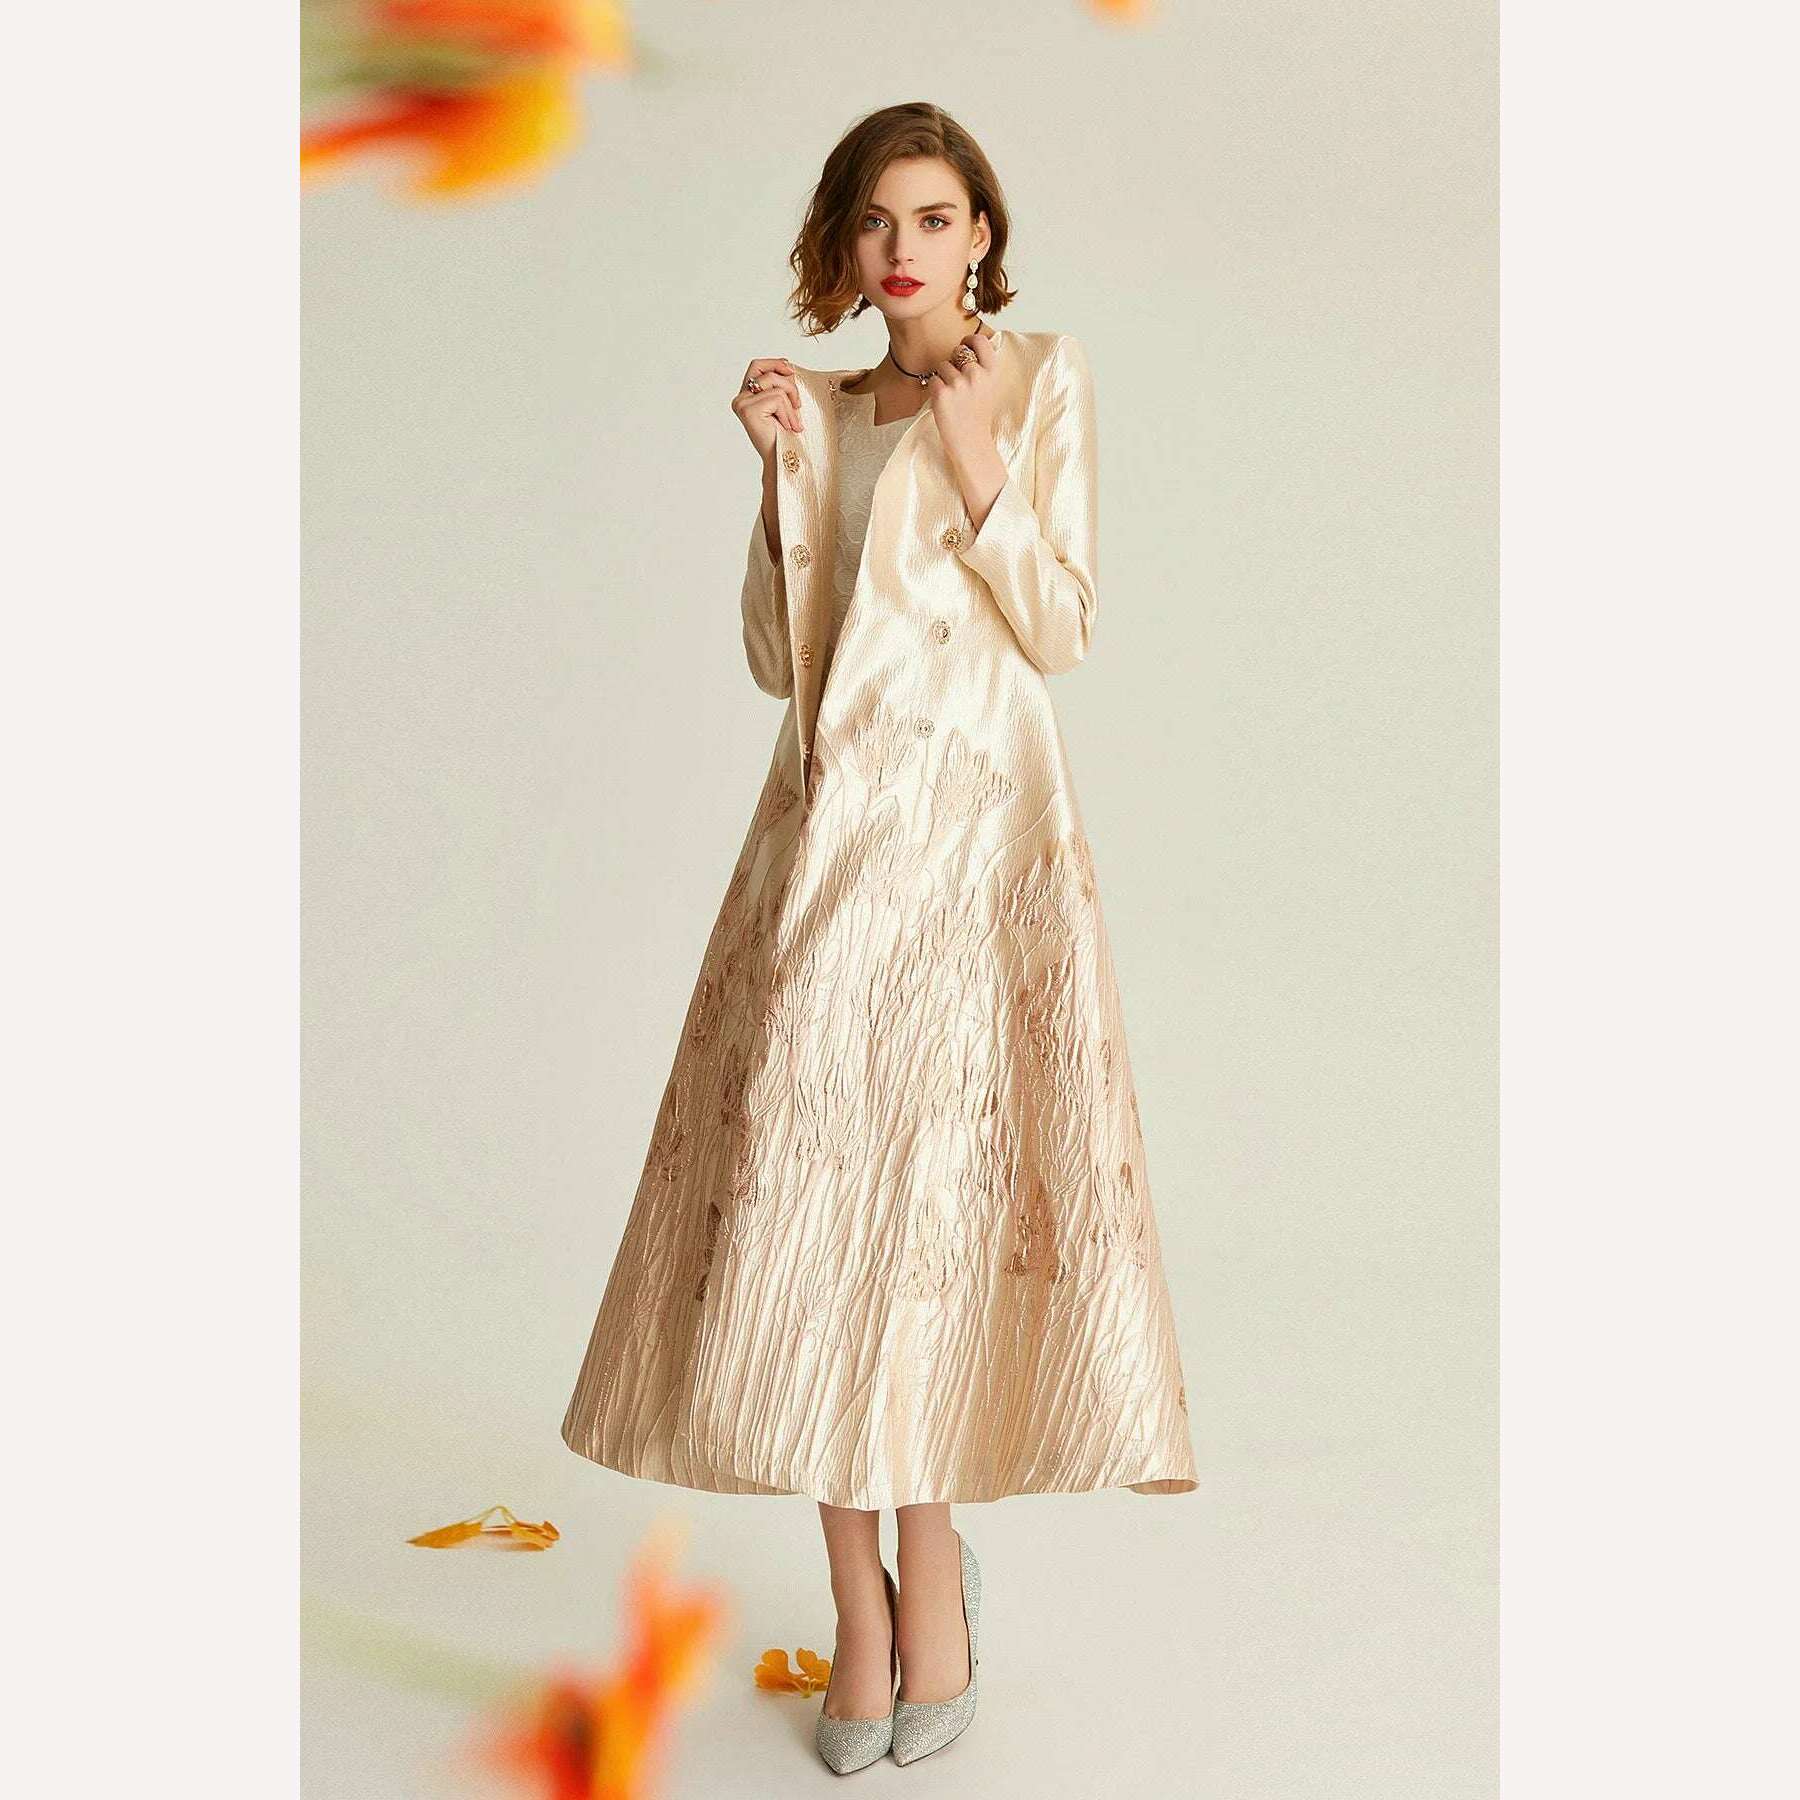 KIMLUD, Luxury Trench Women Autumn Winter Jacquard Coat Floral Covered Button Long Dress Coat Jacket Overcoat New Year Evening Wear Gift, KIMLUD Women's Clothes